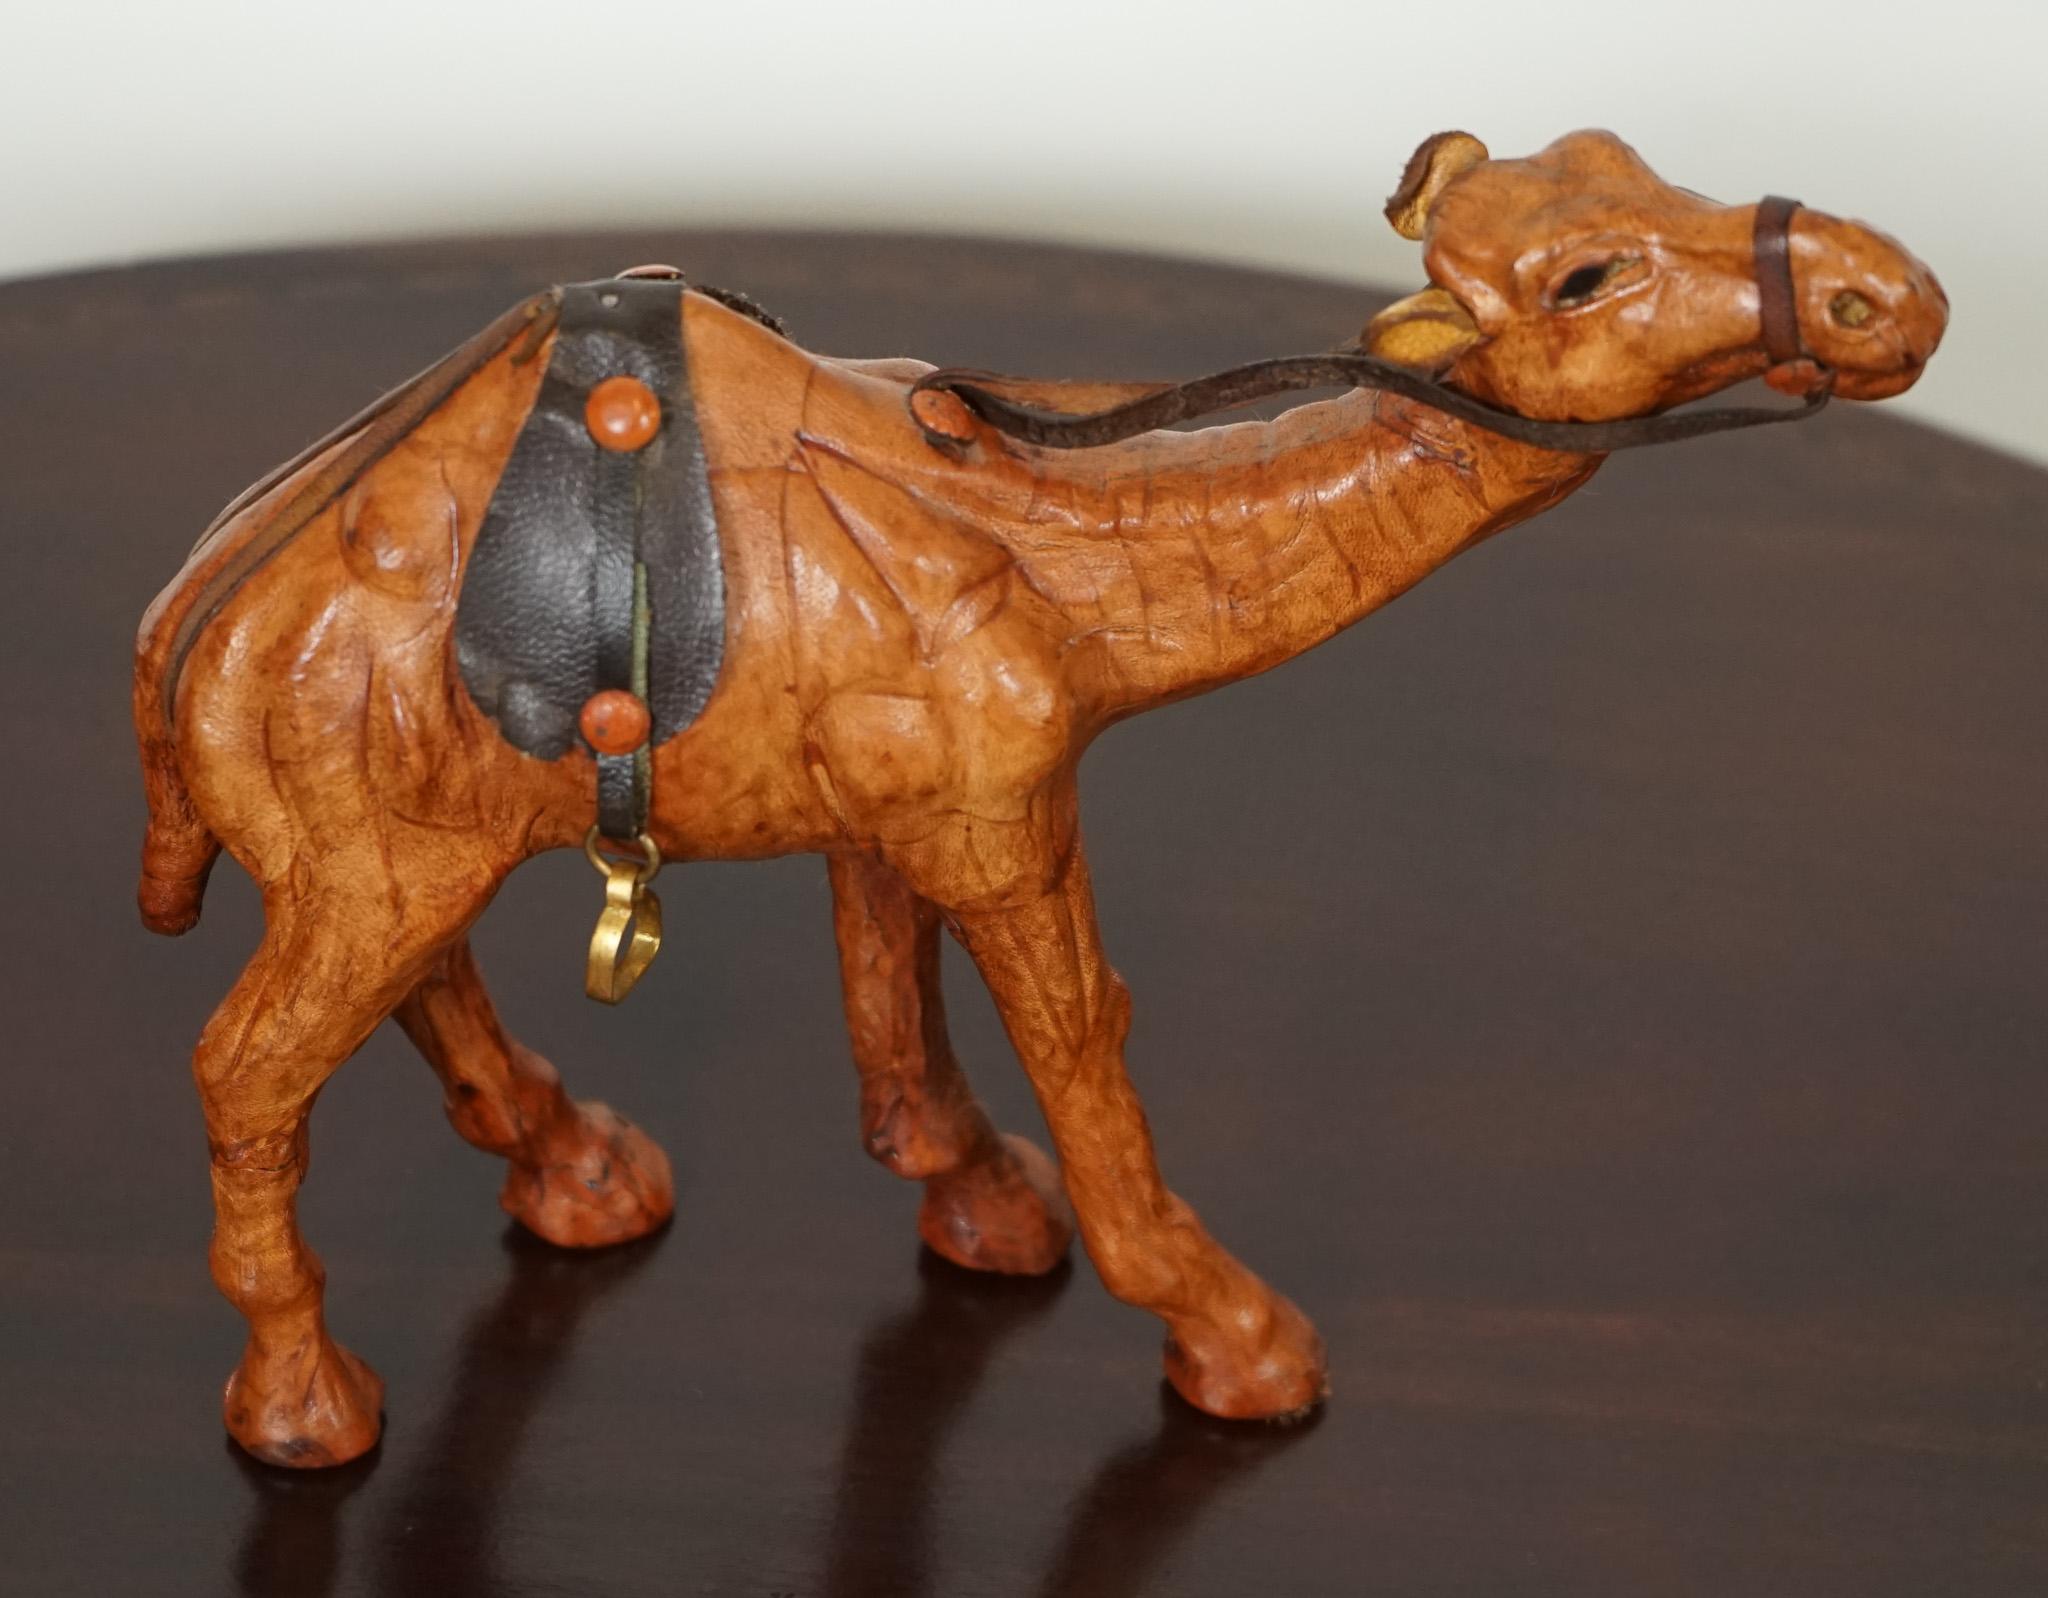 LIBERTY'S LONDON CAMEL SculPTURE WiTH LOVELY AGED LEATHER ON HAND CARved WOOD  im Zustand „Gut“ im Angebot in Pulborough, GB